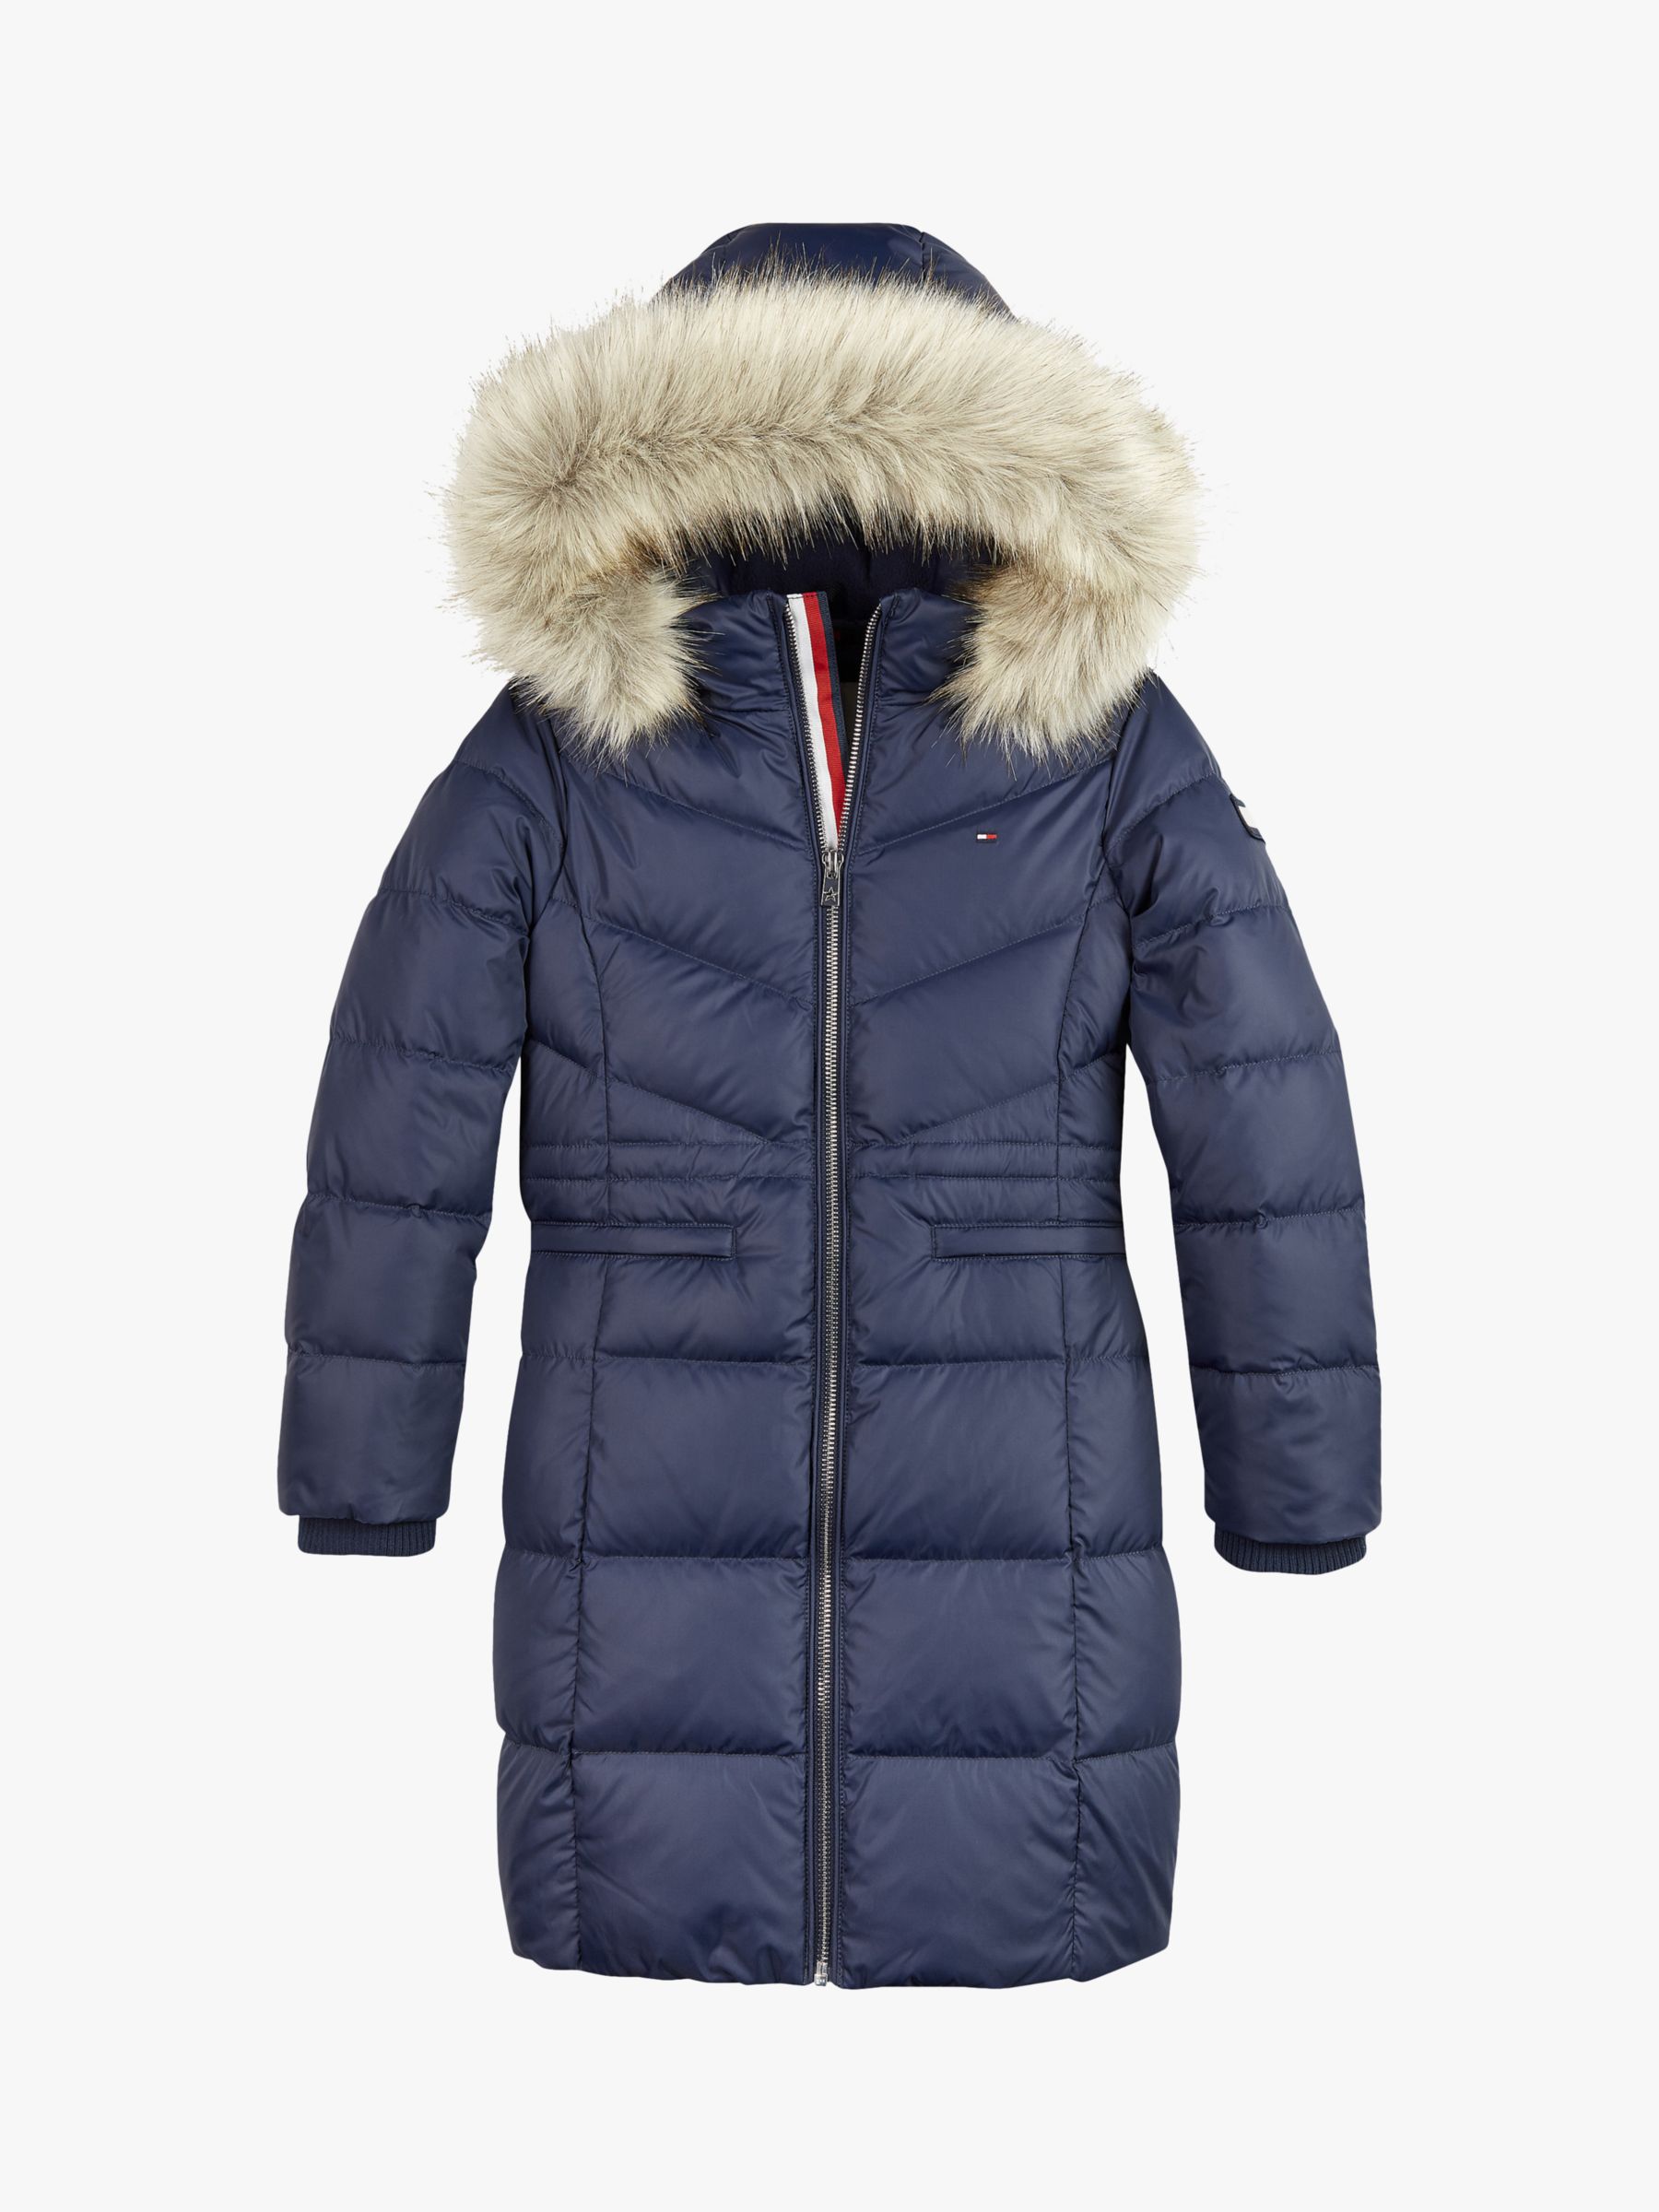 Image of Tommy Hilfiger Girls DownFilled Long Faux Fur Hooded Coat Twilight Navy